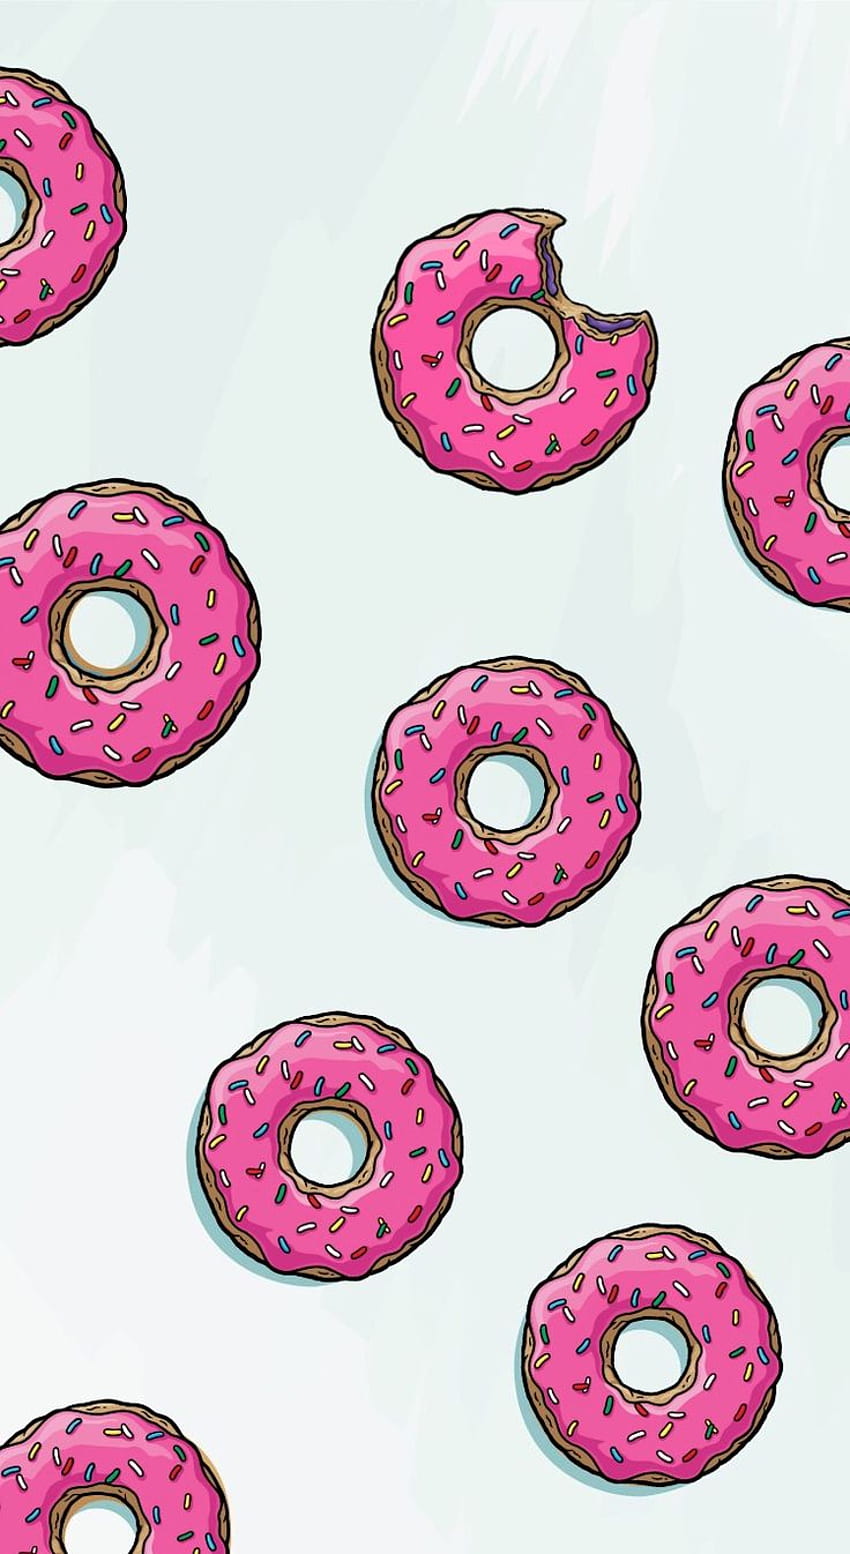 Donuts Seamless Pattern Cute Sweet Food Baby Background Colorful Design  for Textile Wallpaper Fabric Decor Stock Illustration  Illustration of  colorful donuts 120292770